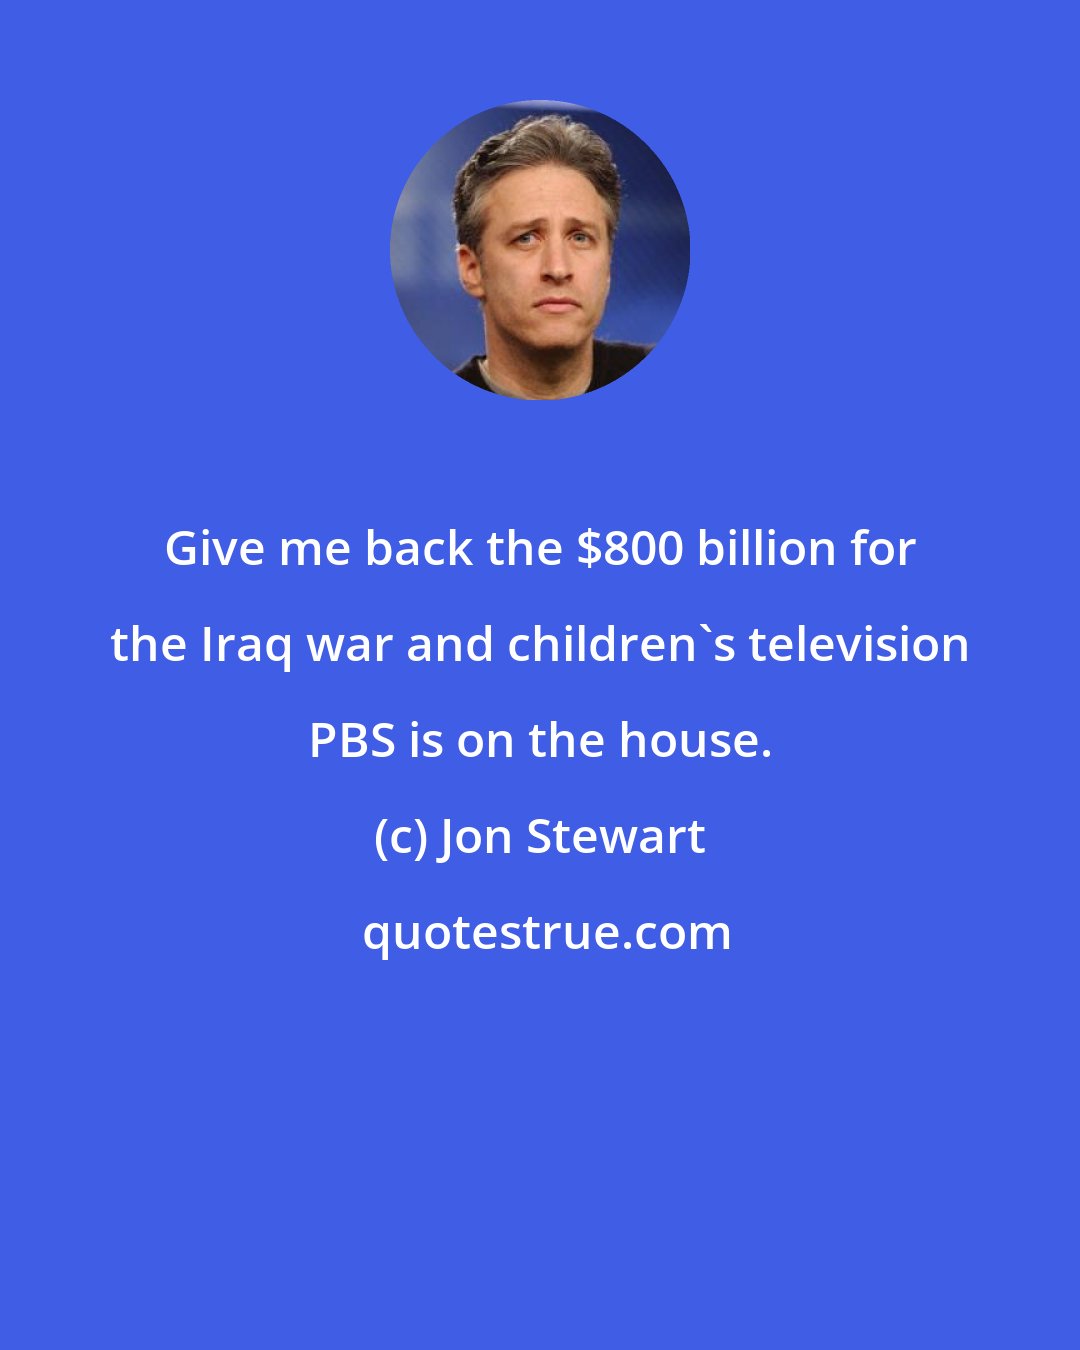 Jon Stewart: Give me back the $800 billion for the Iraq war and children's television PBS is on the house.